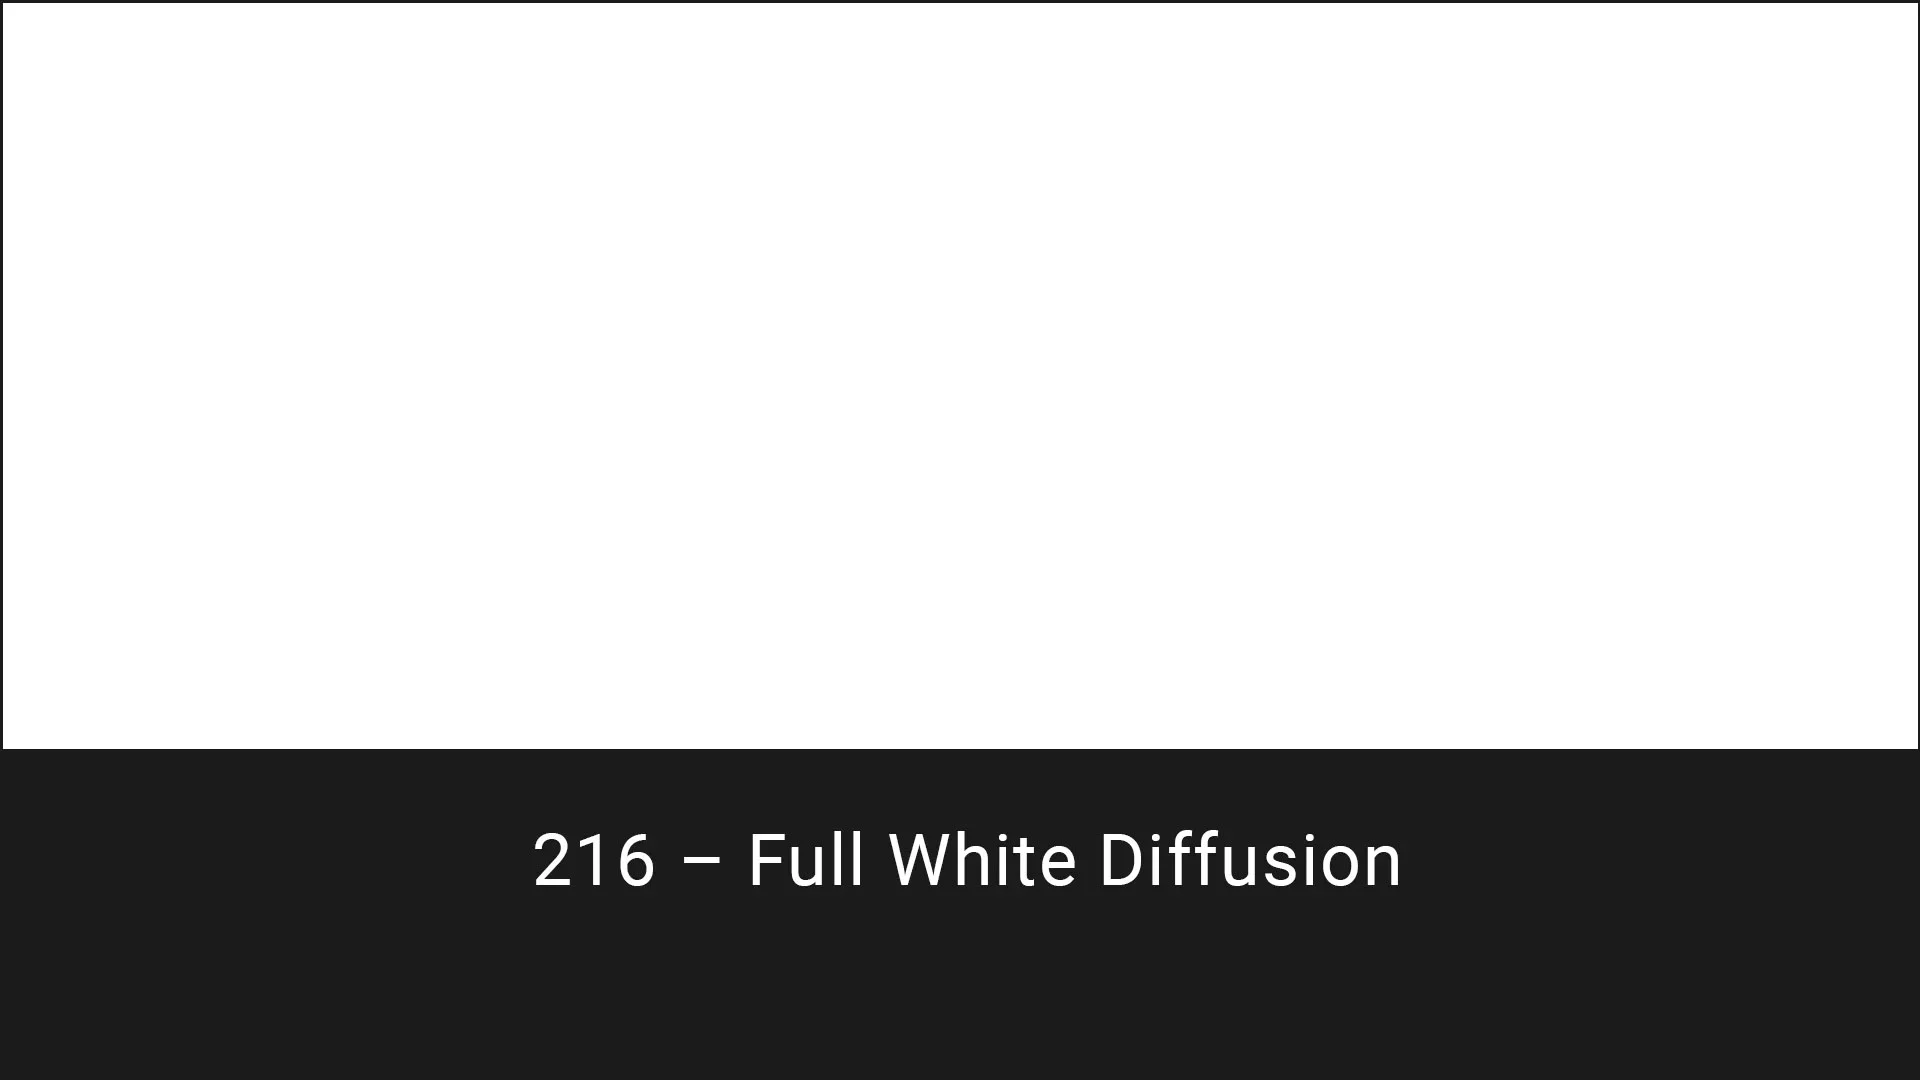 Cotech filters 216 Full White Diffusion